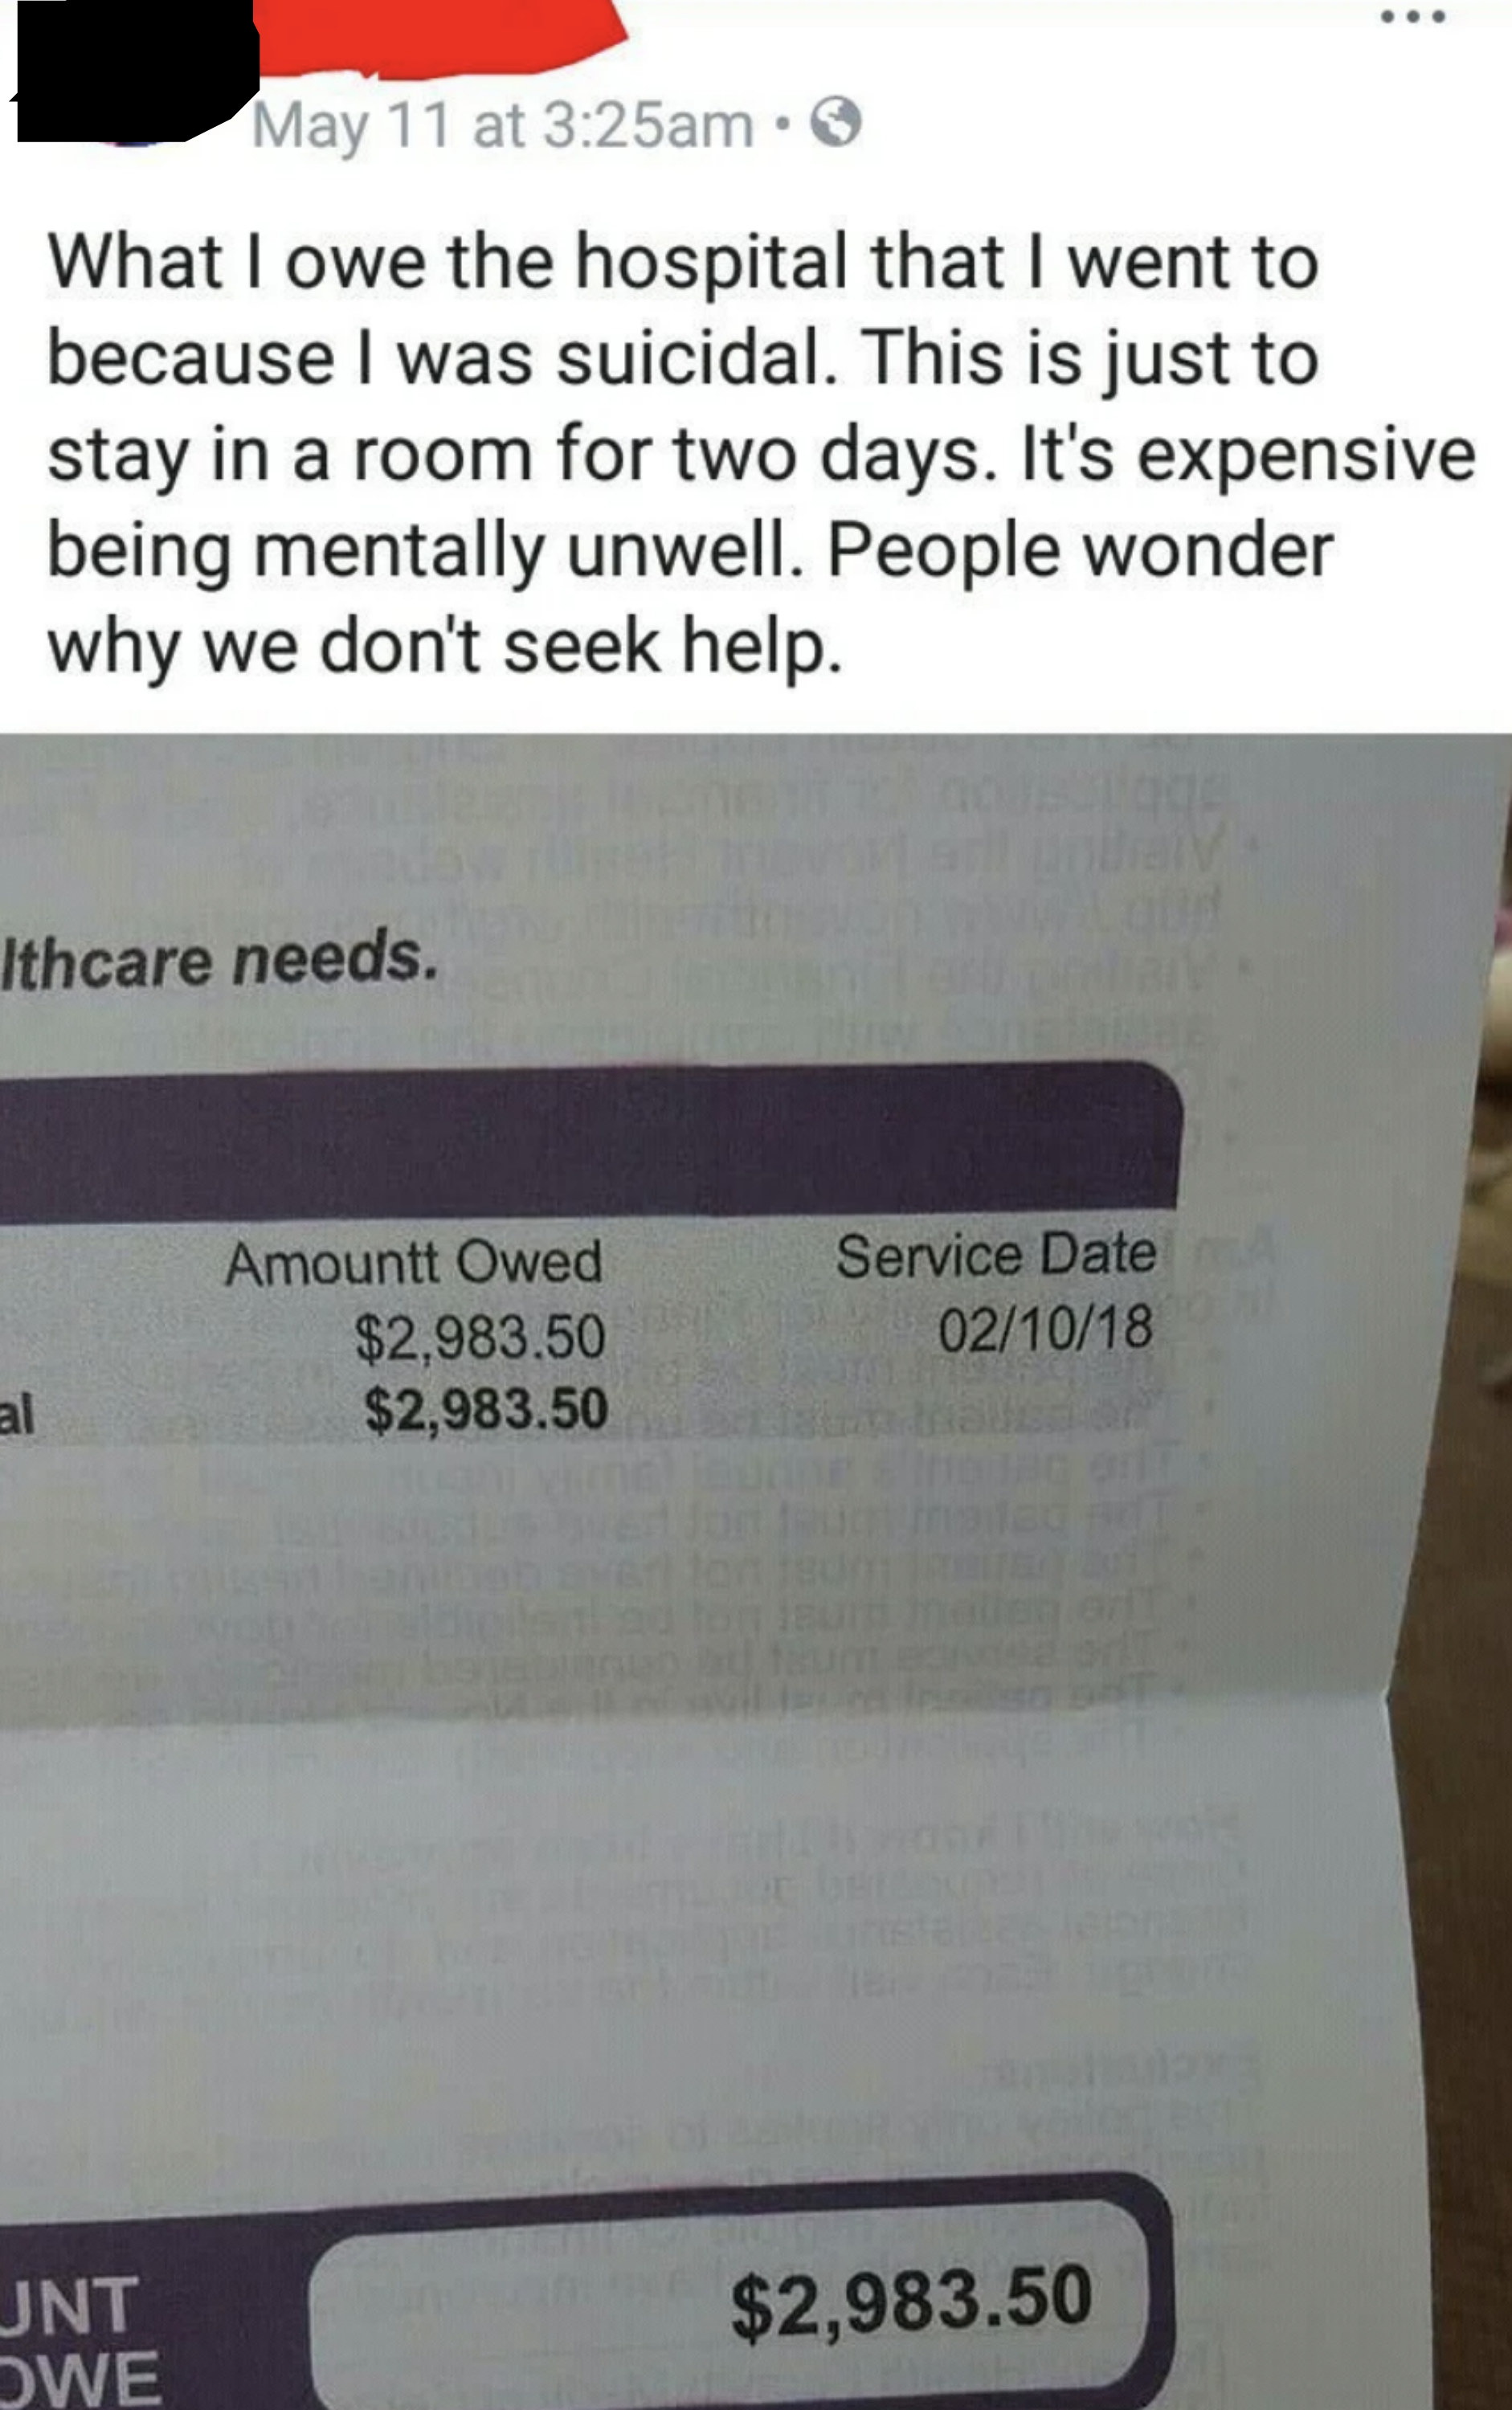 Tweet: &quot;What I owe the hospital I went to because I was suicidal; this is just to stay in a room for two days; people wonder why we don&#x27;t seek help&quot; and a bill for $2,983